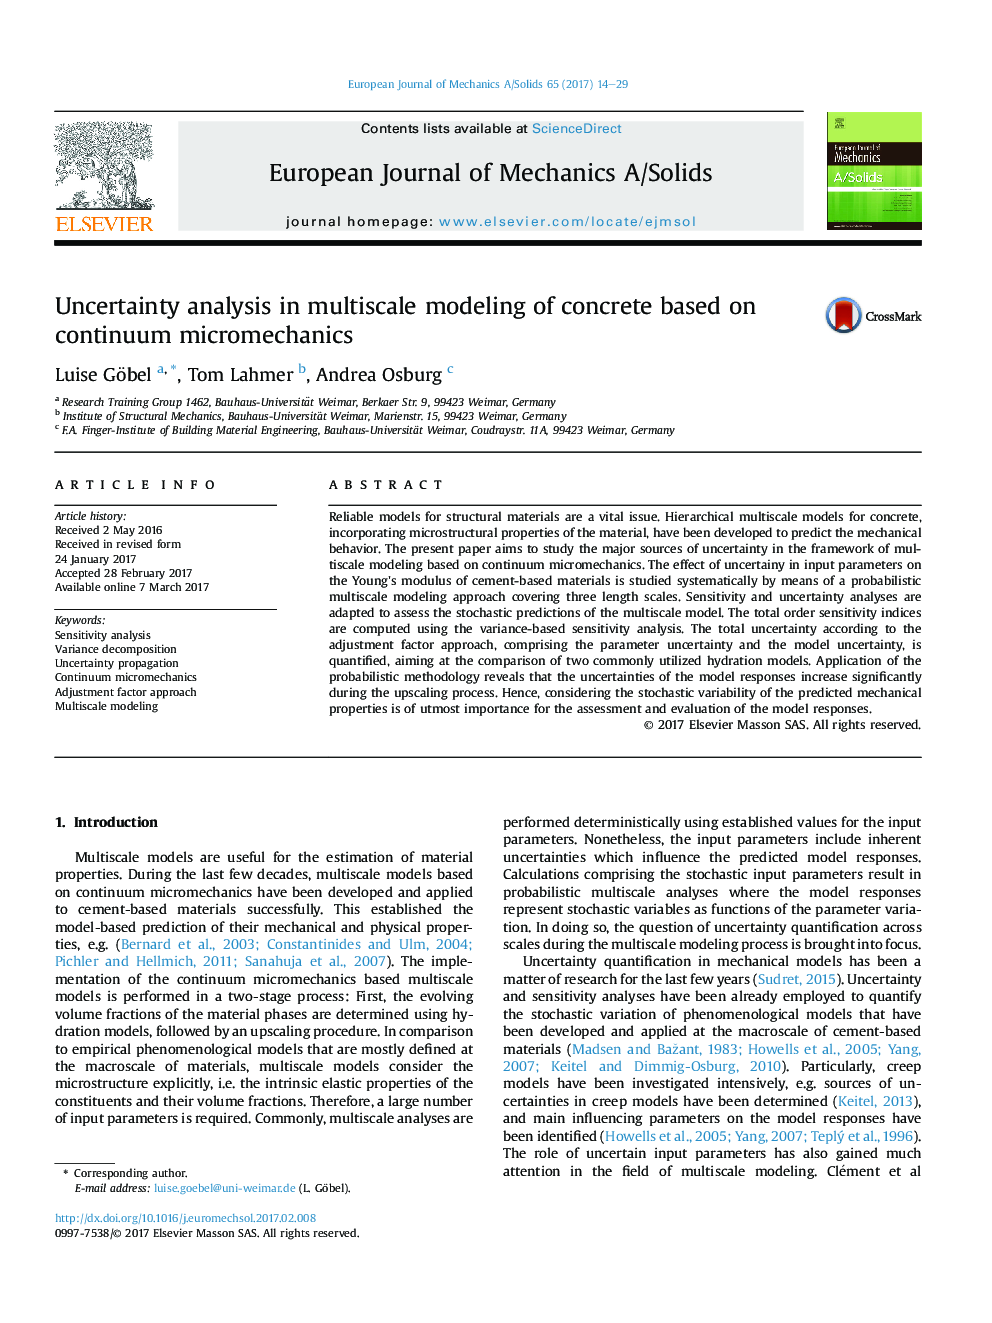 Uncertainty analysis in multiscale modeling of concrete based on continuum micromechanics